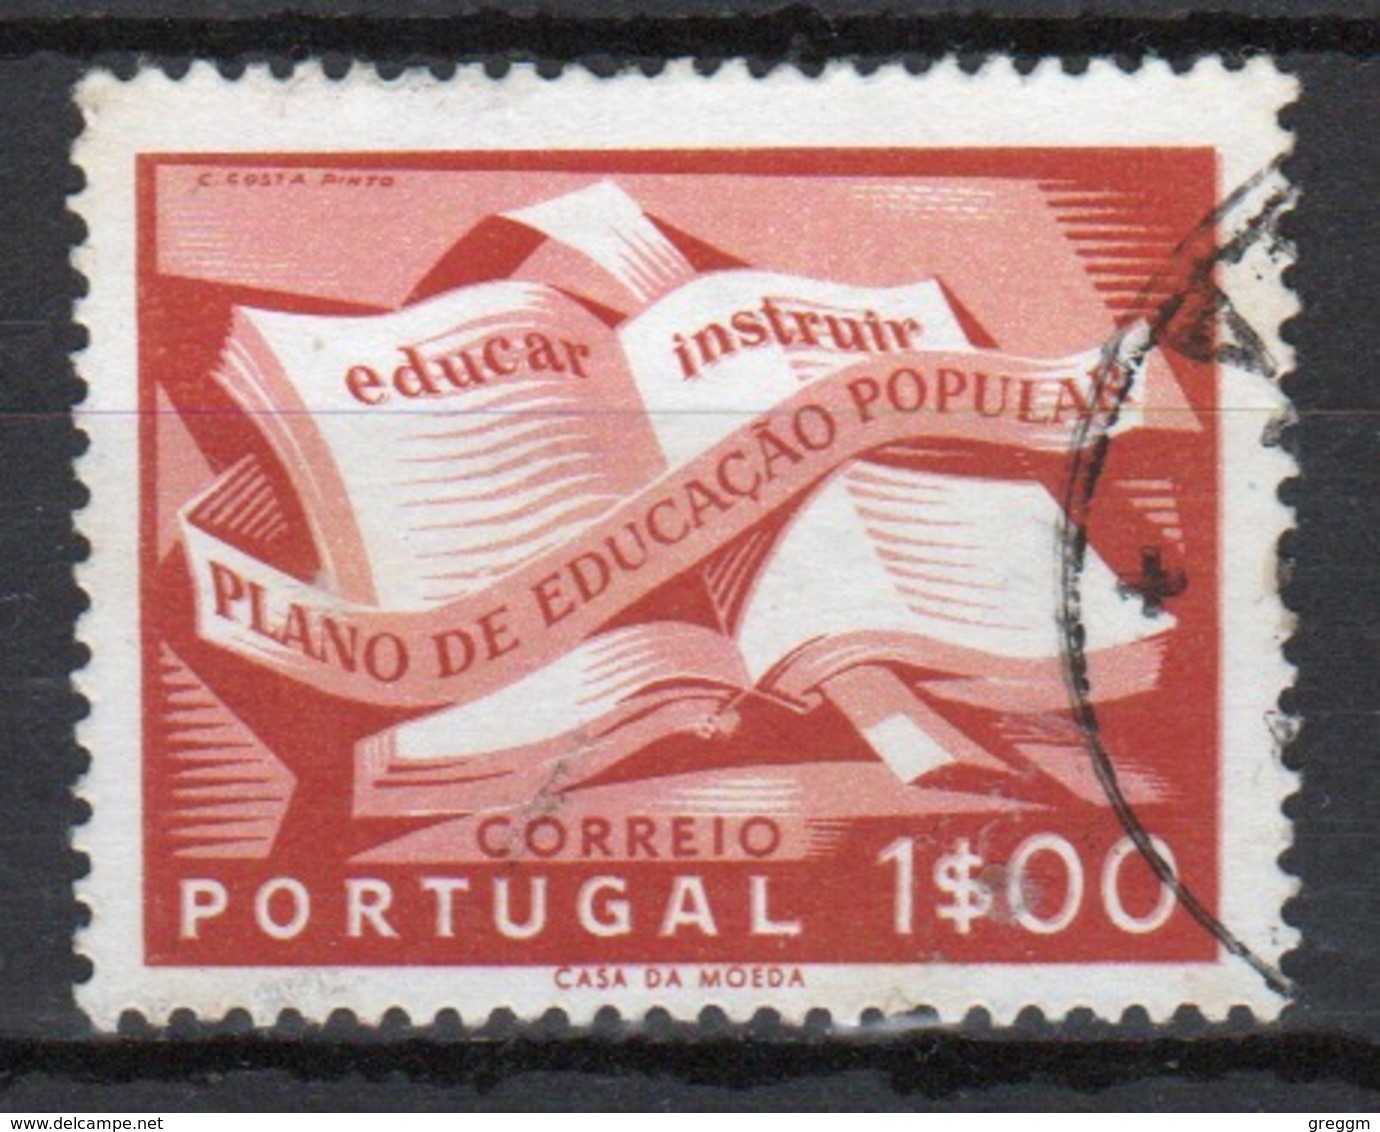 Portugal 1954 Single 1e Stamp Celebrating The People's Education Plan. - Used Stamps